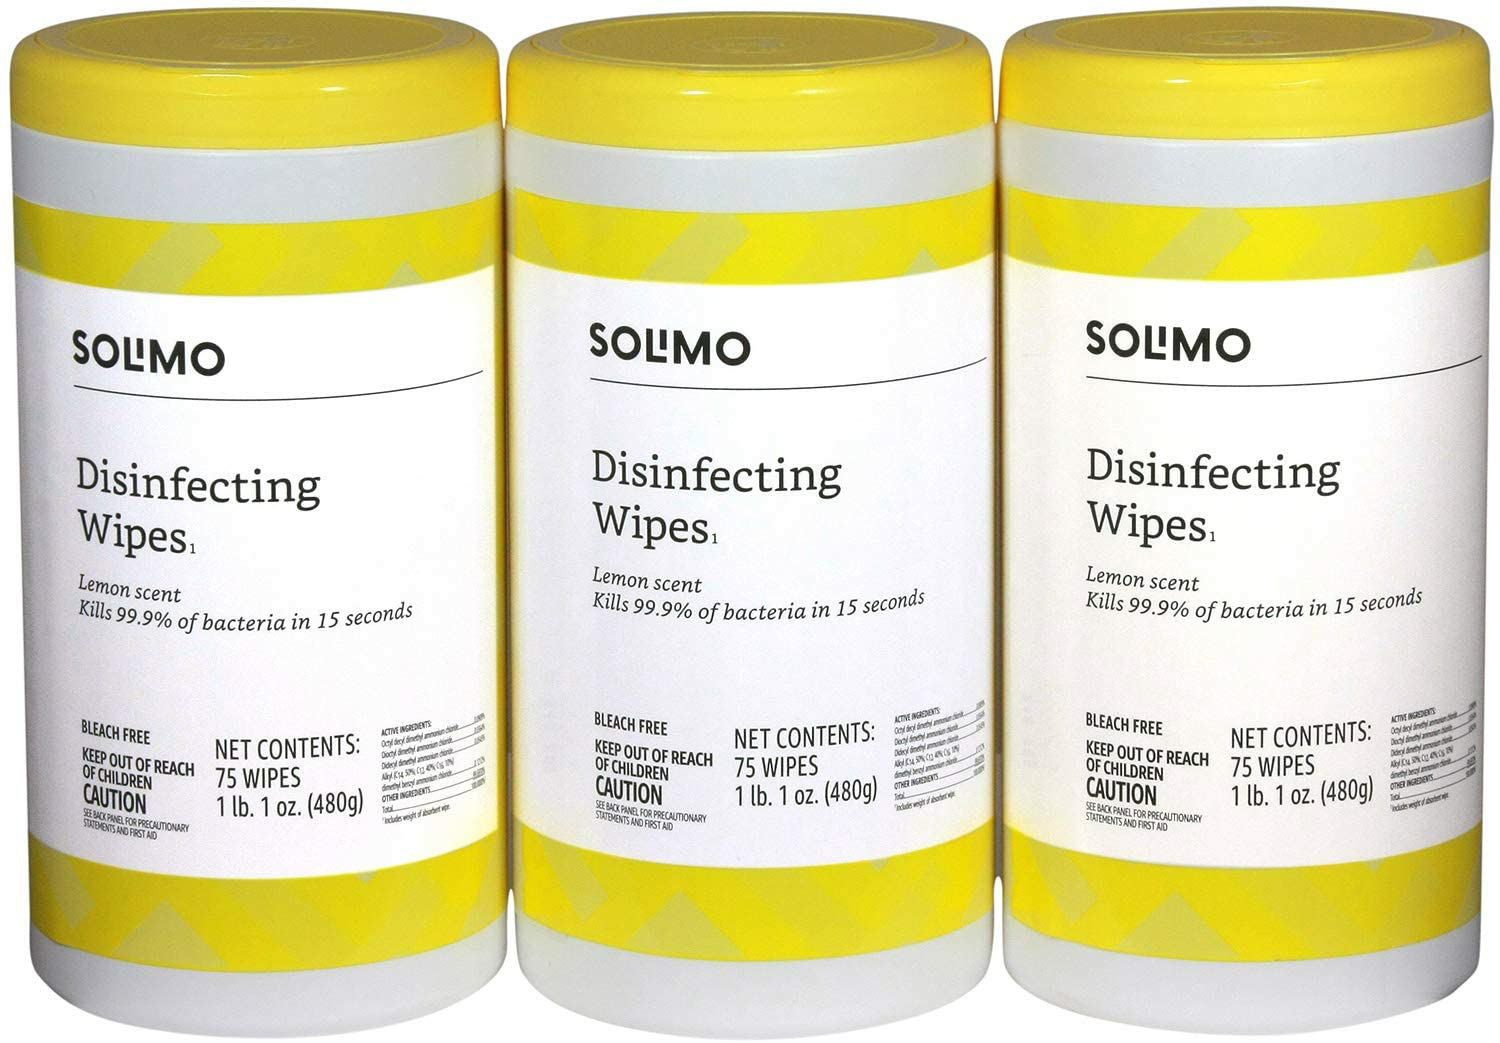 Amazon.com:$8.10-$9.05 w/ S&S Amazon Brand - Solimo Disinfecting Wipes, Lemon Scent, Sanitizes/Cleans/Disinfects/Deodorizes, 75 Count (Pack of 3): Health & Personal Care $8.10